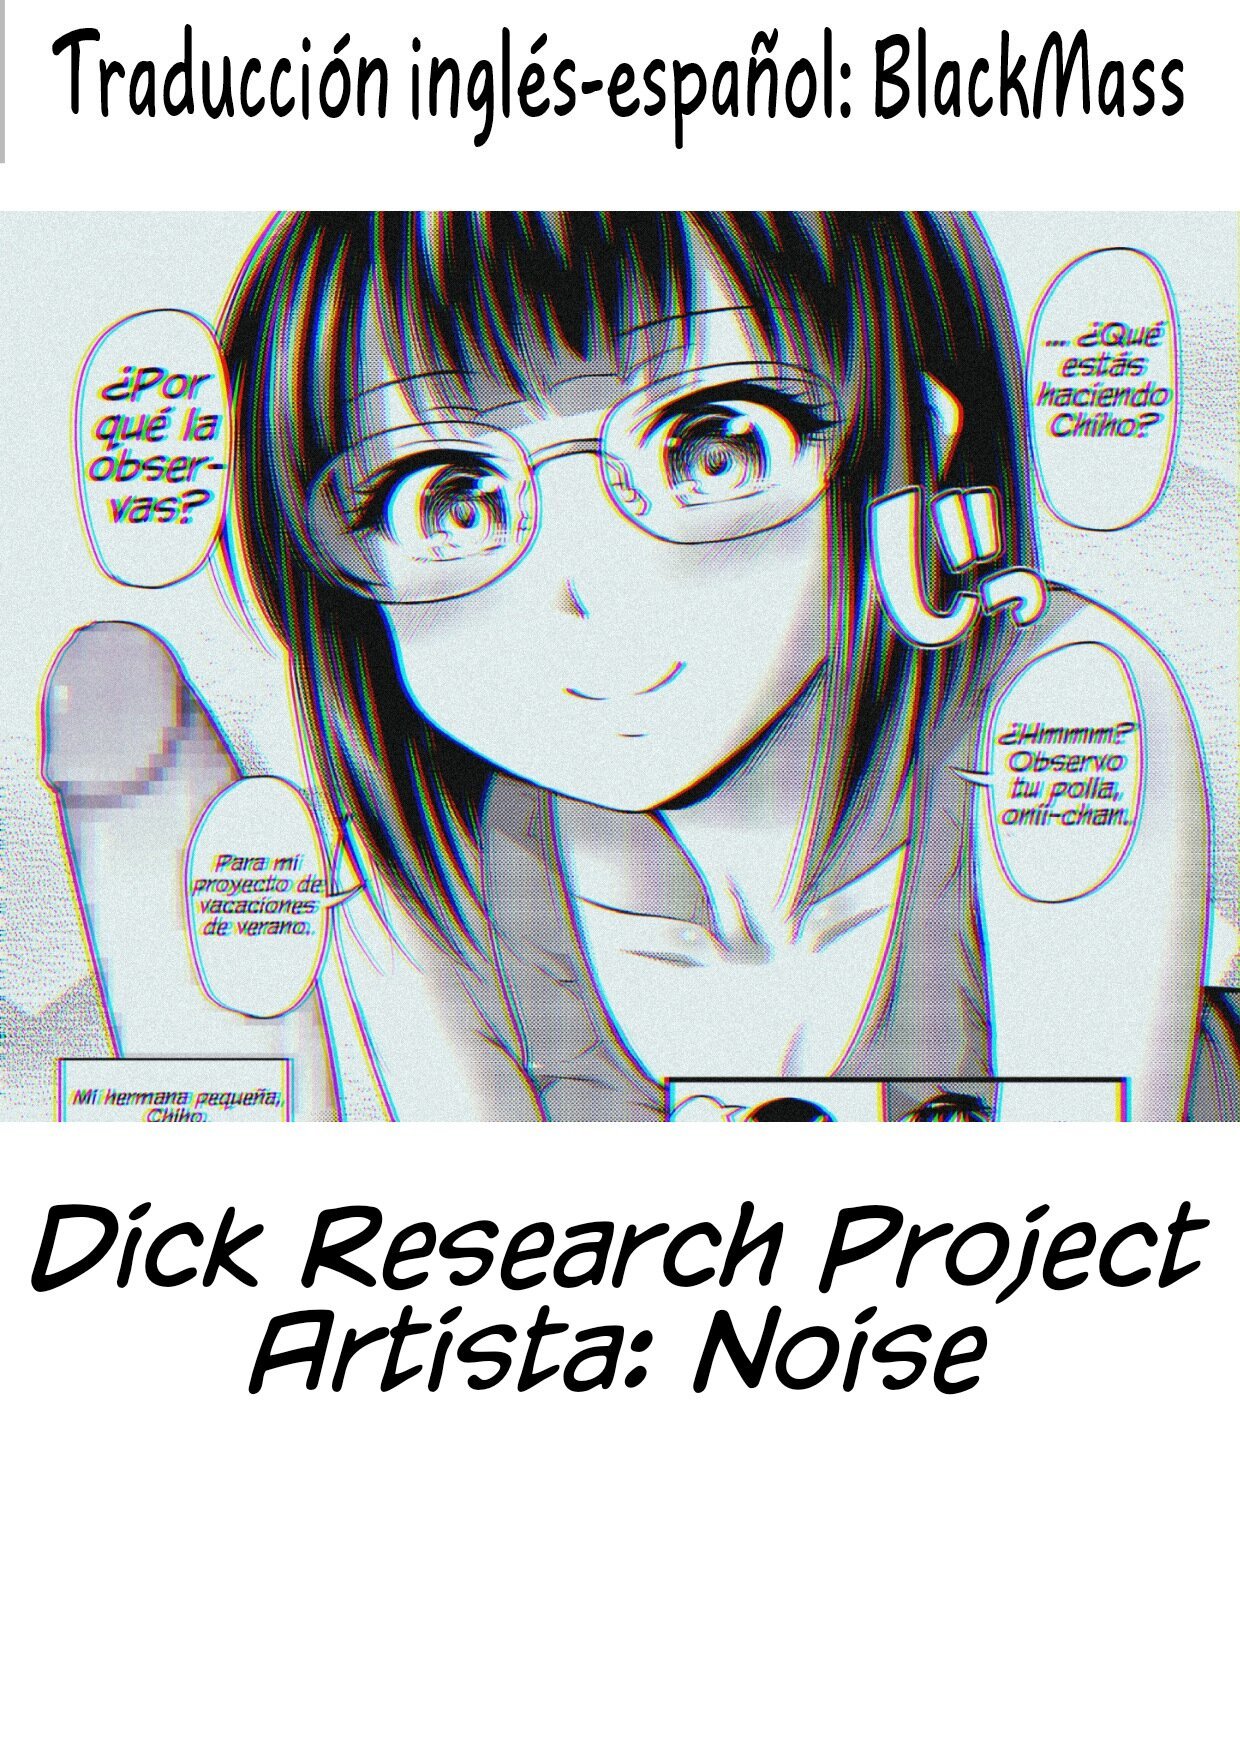 &#91;Noise&#93; Dick Research Project - 16